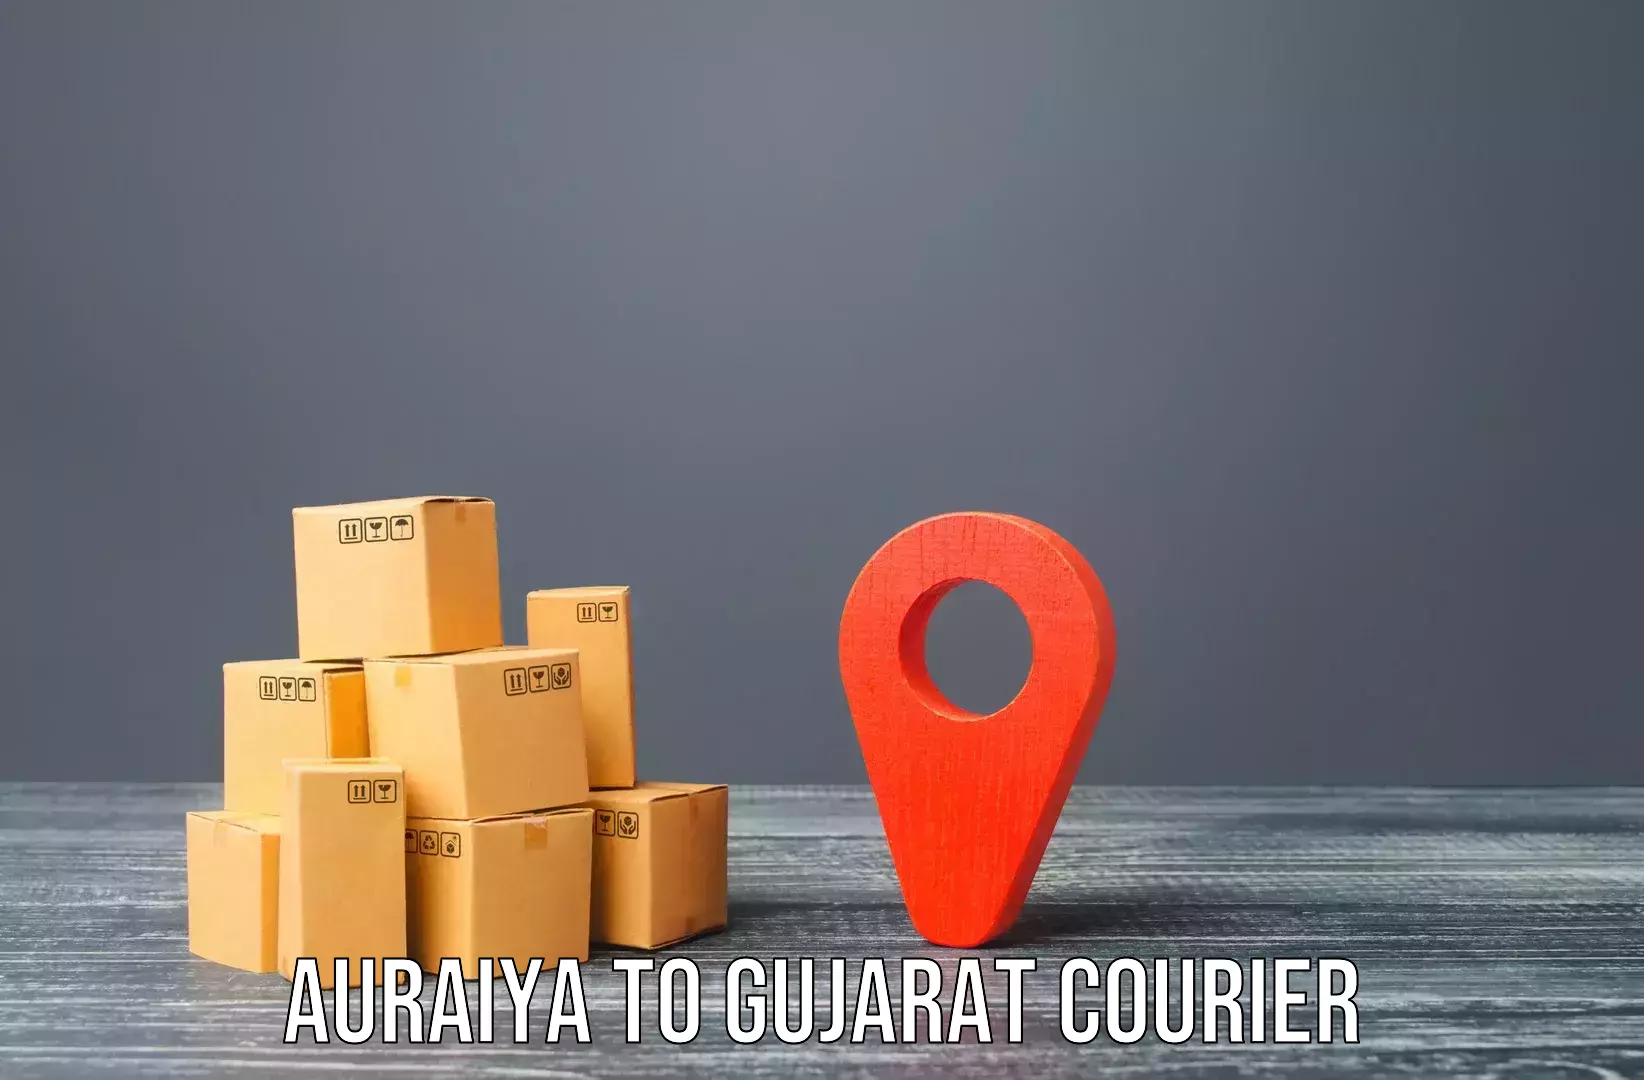 Furniture delivery service Auraiya to Sanand